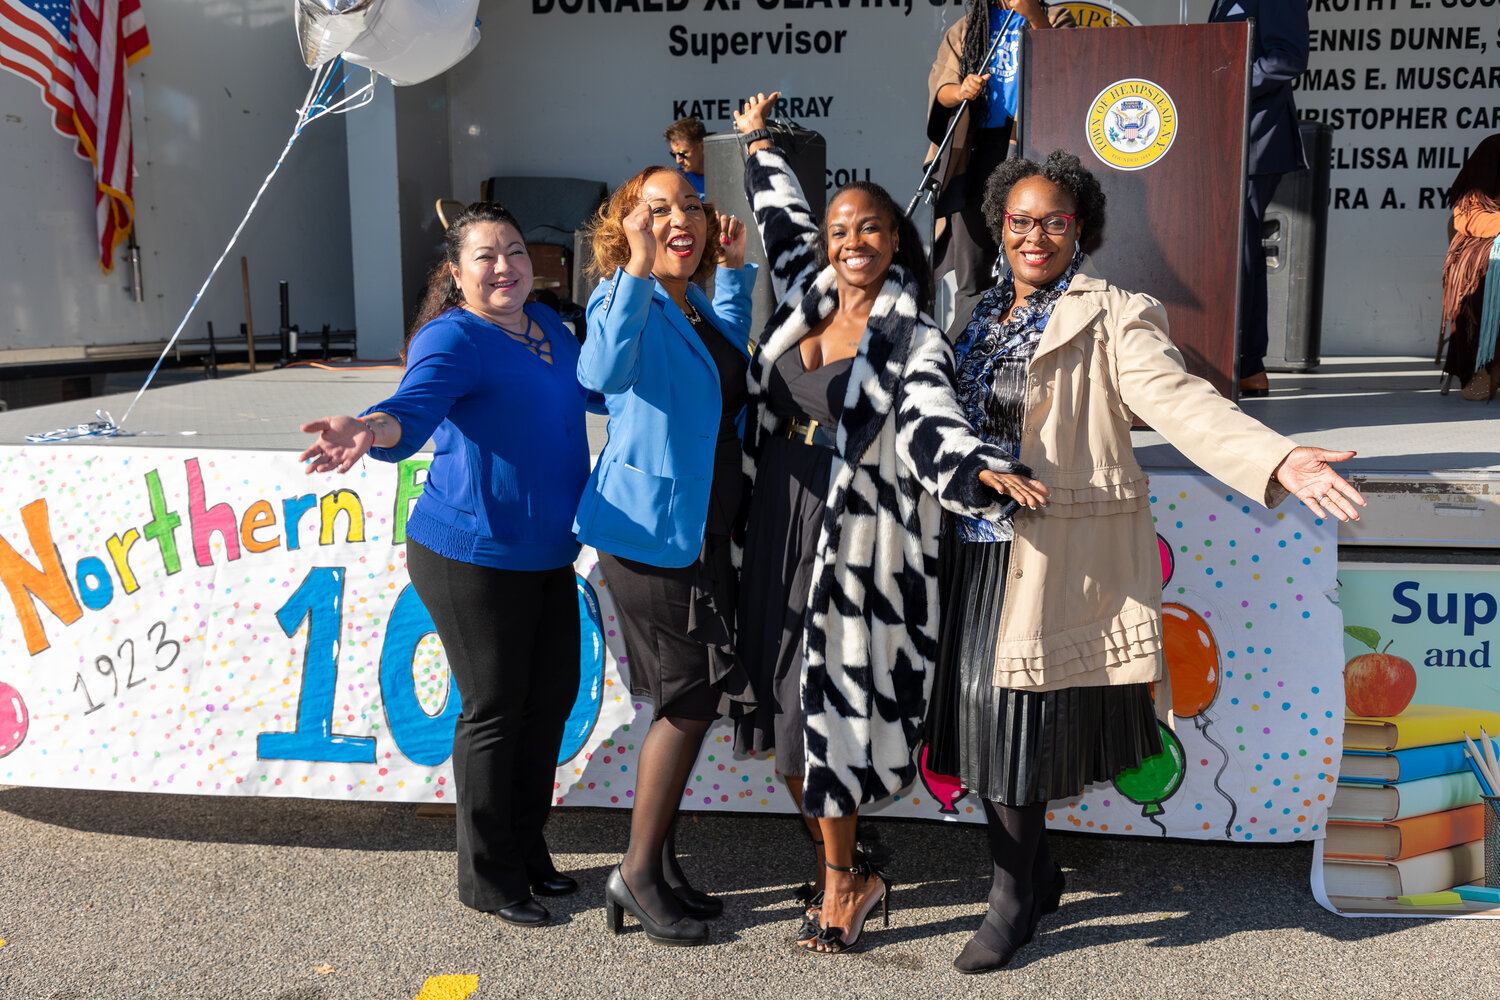 Uniondale Board of Education Trustee Addie Blanco-Harvey, district Superintendent Monique Darrisaw-Akil, Assemblywoman Taylor Darling and school board Trustee Charmise Desiré gave a victory flourish at the 100th anniversary celebration of Northern Parkway School.